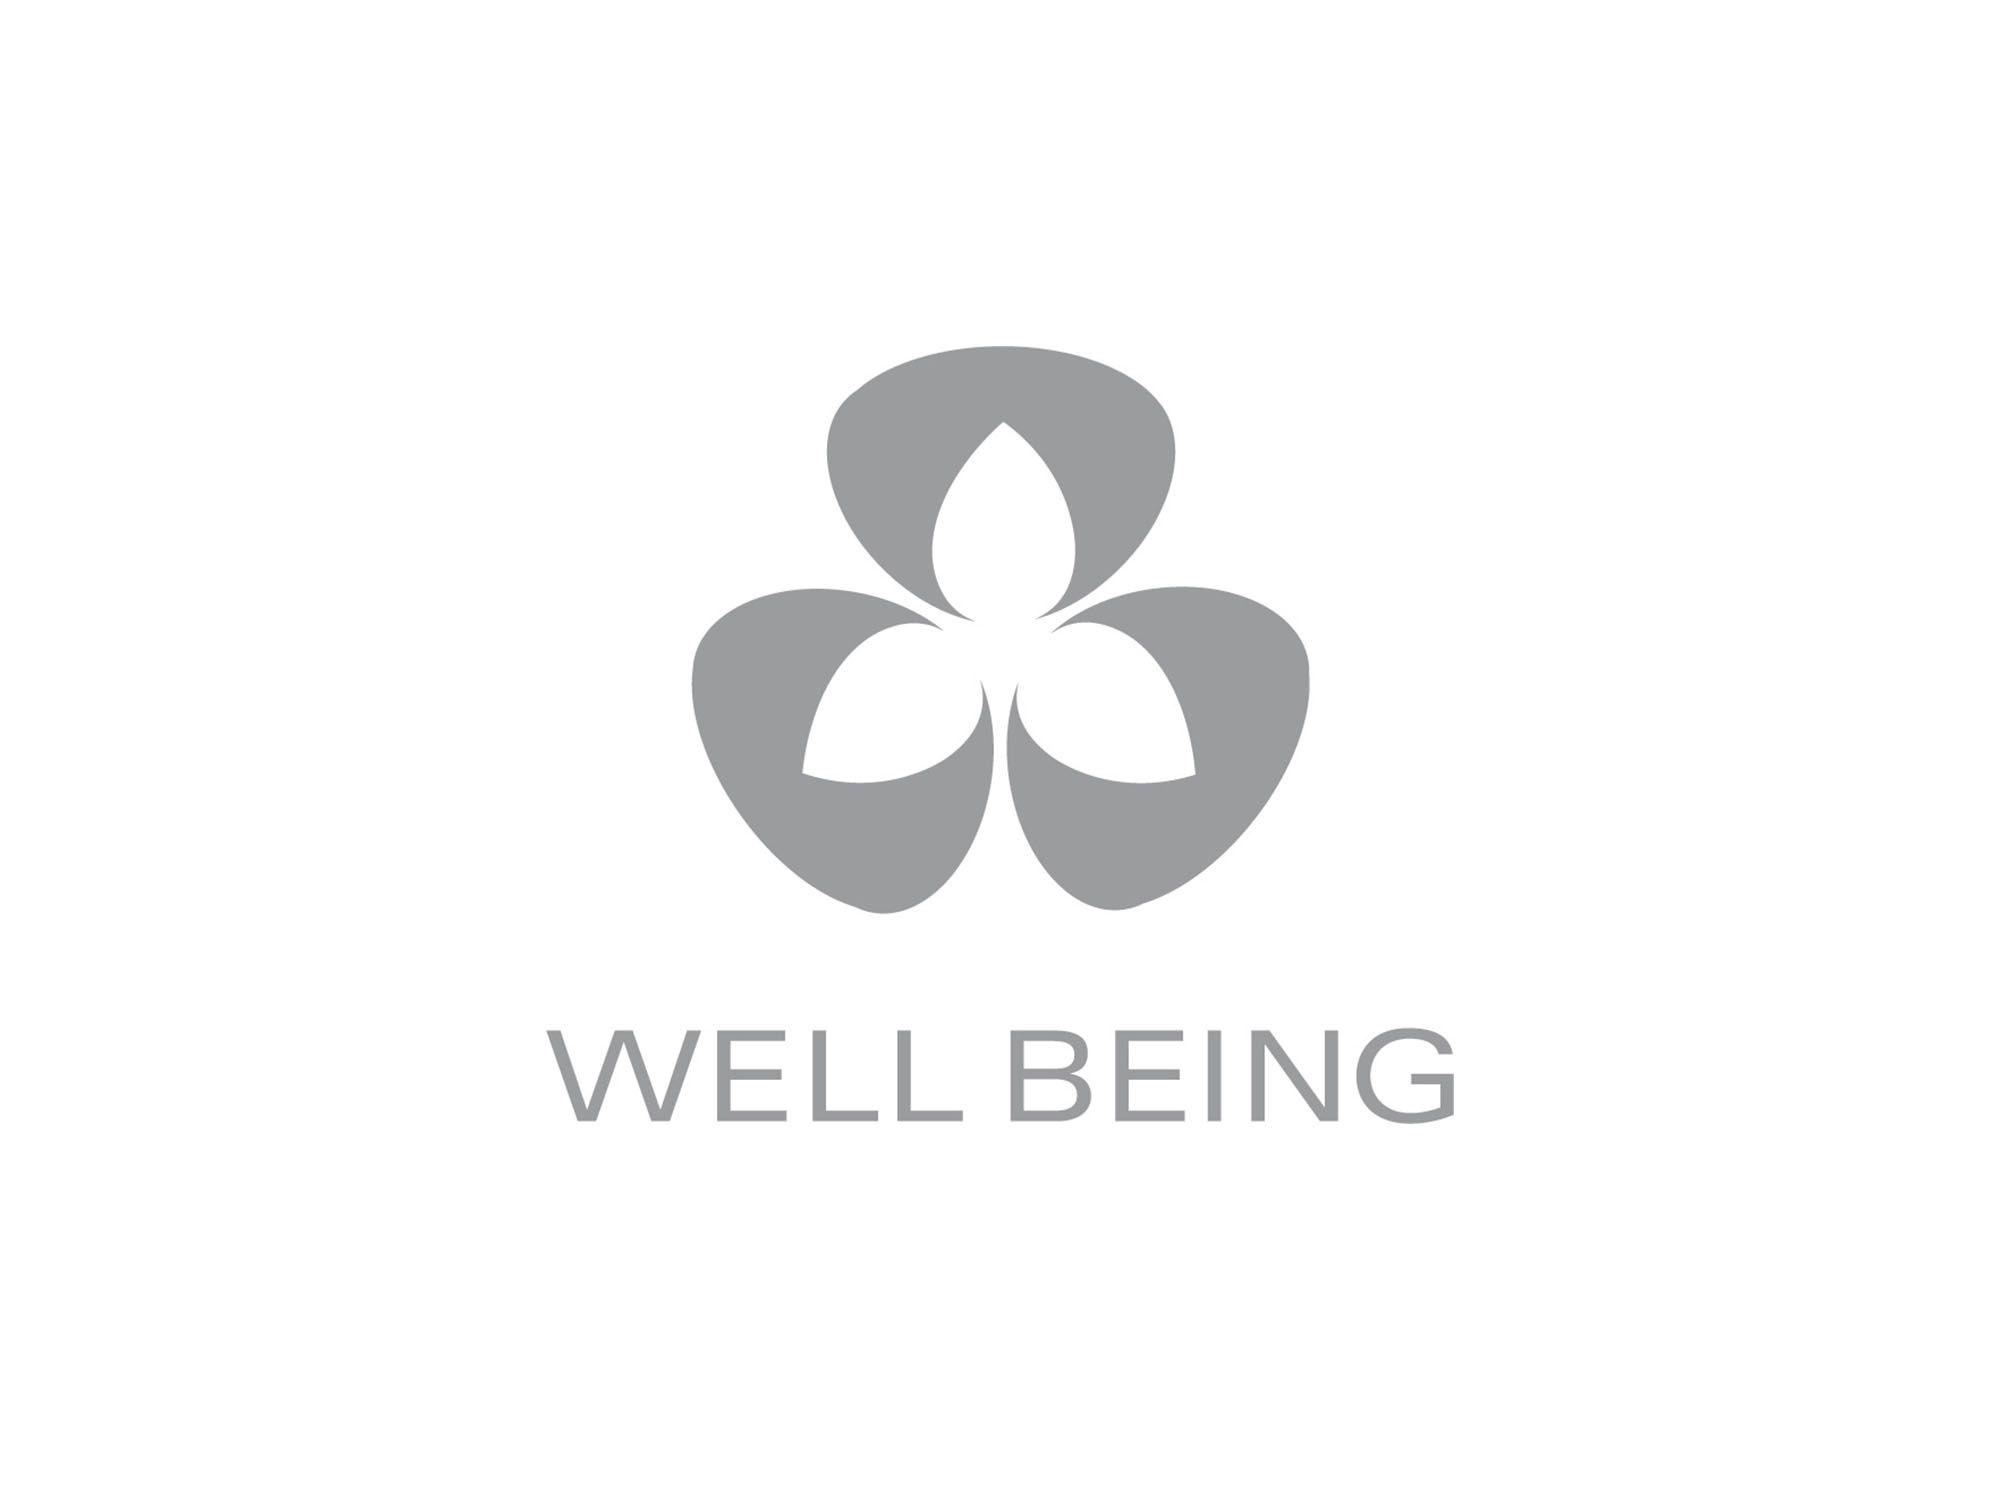 Well-Being Logo - Lissoni Associati | Graphics | Well Being, Ravenna | Logo and ...